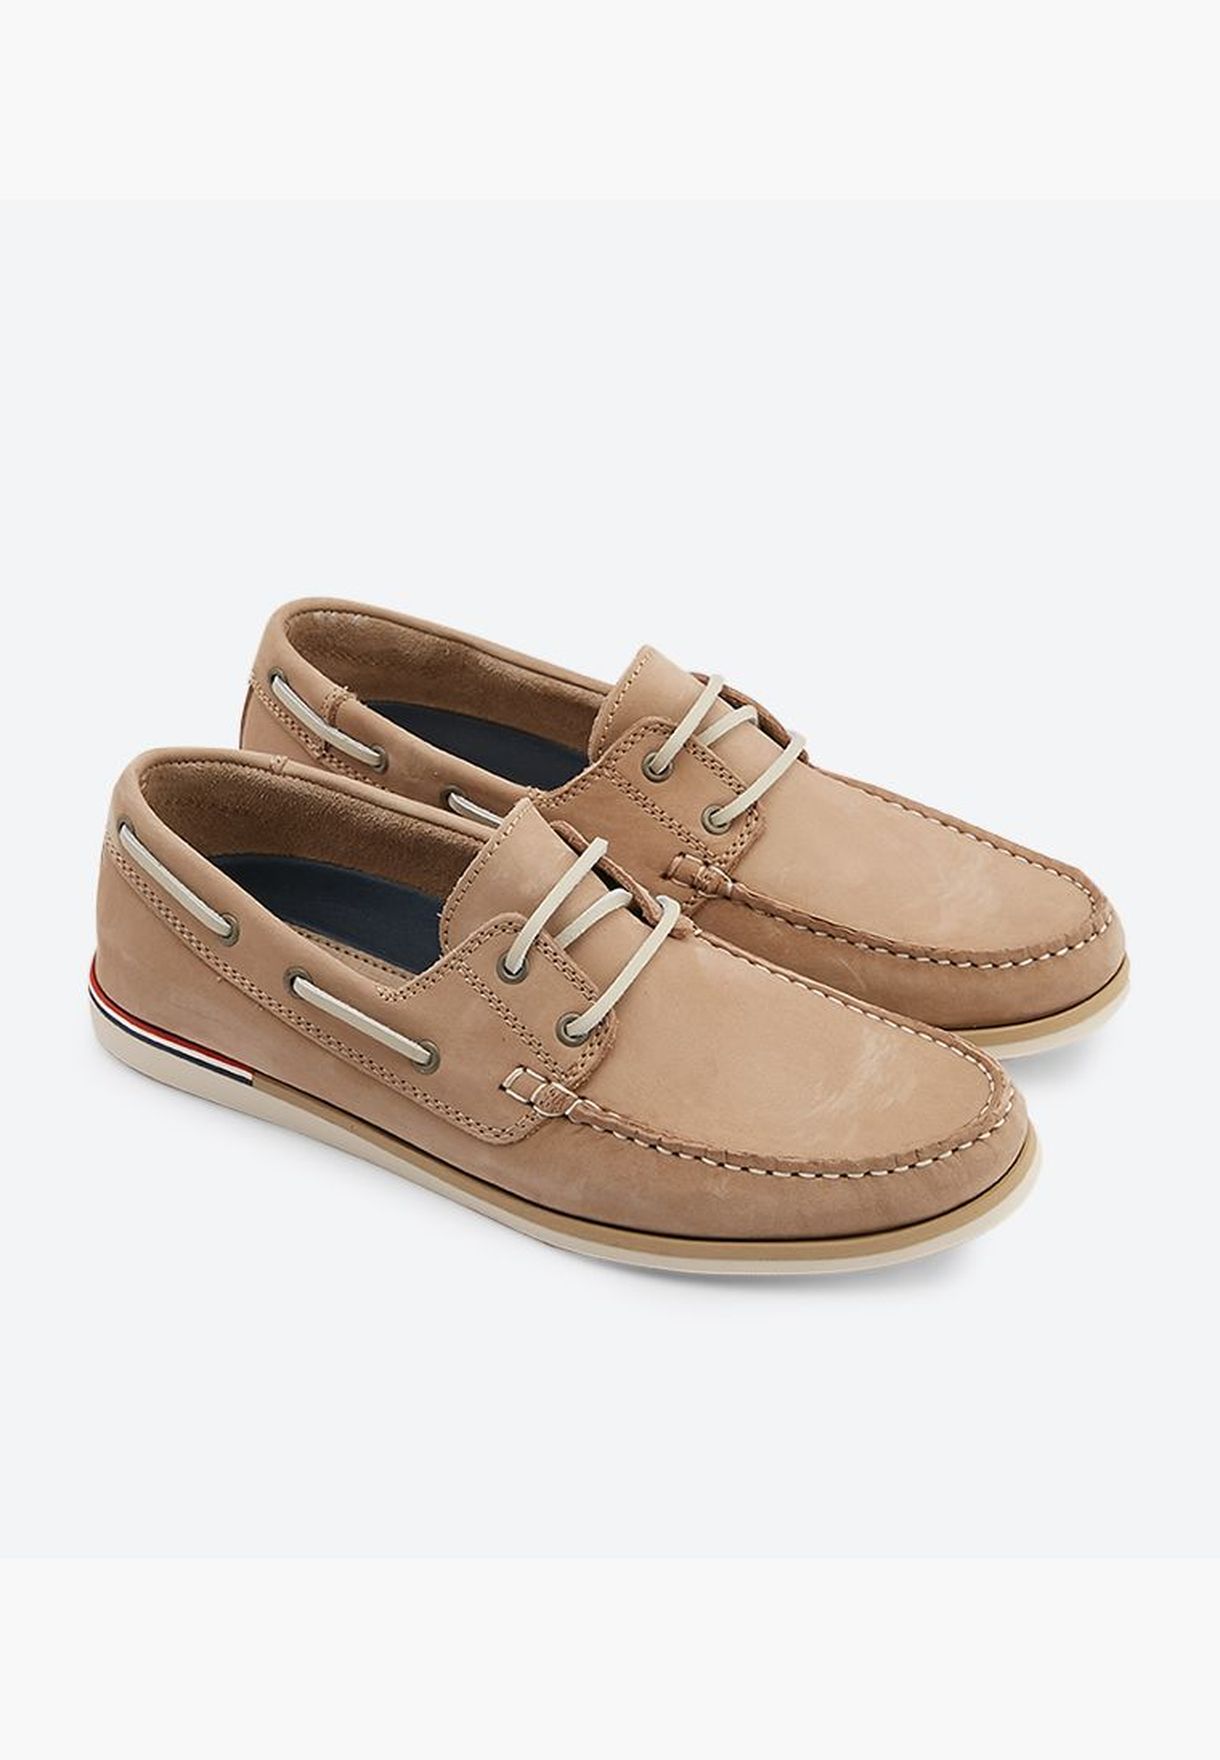 dune boat shoes in tan leather